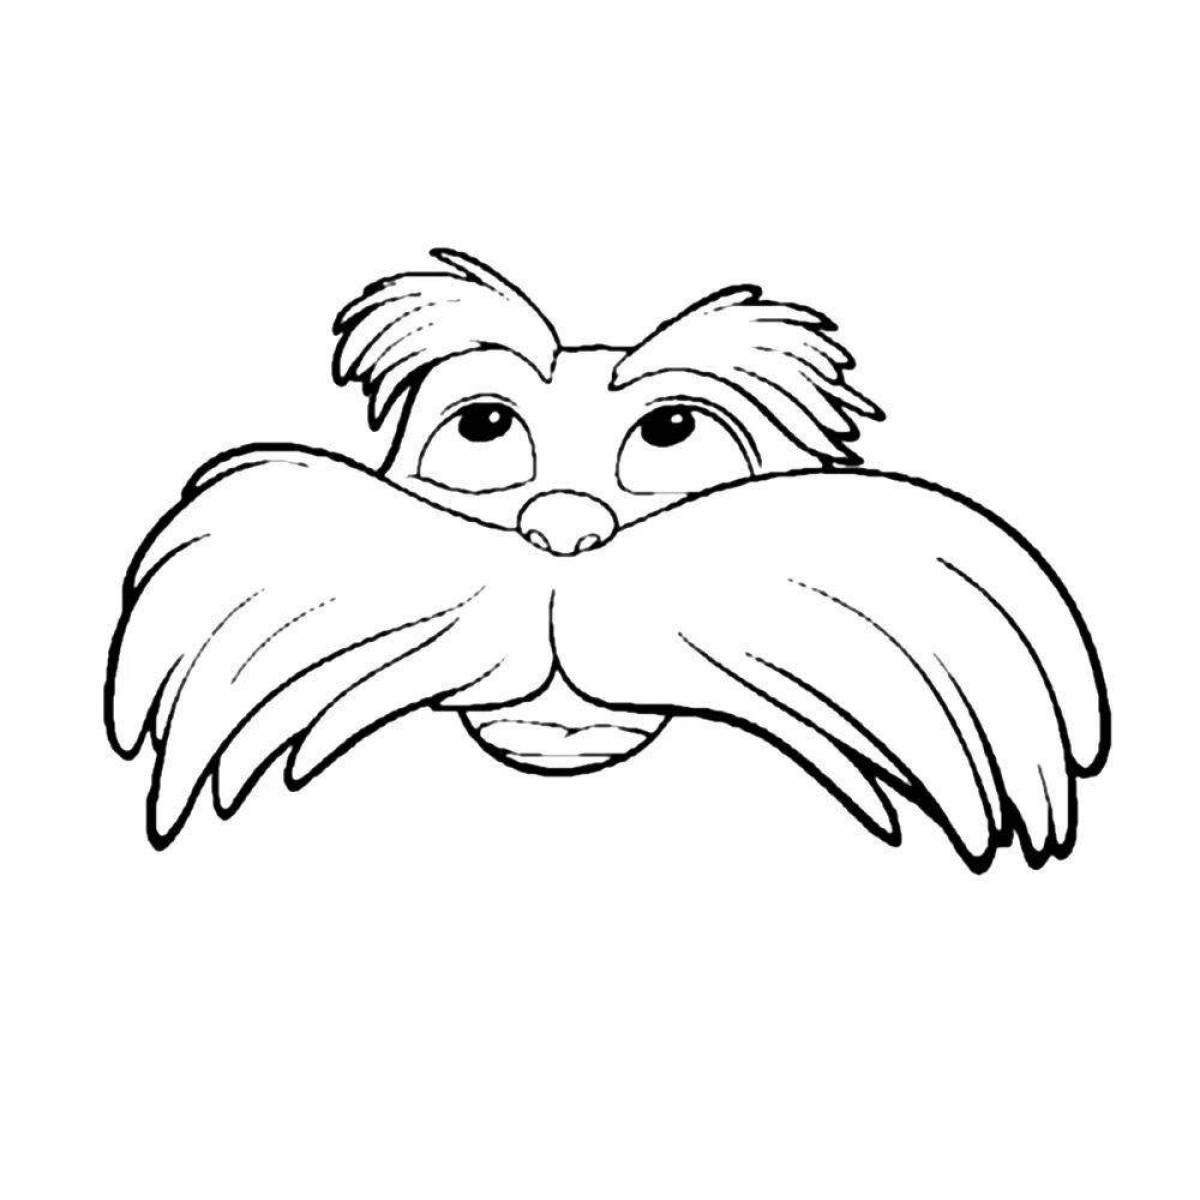 Colorful lorax coloring page